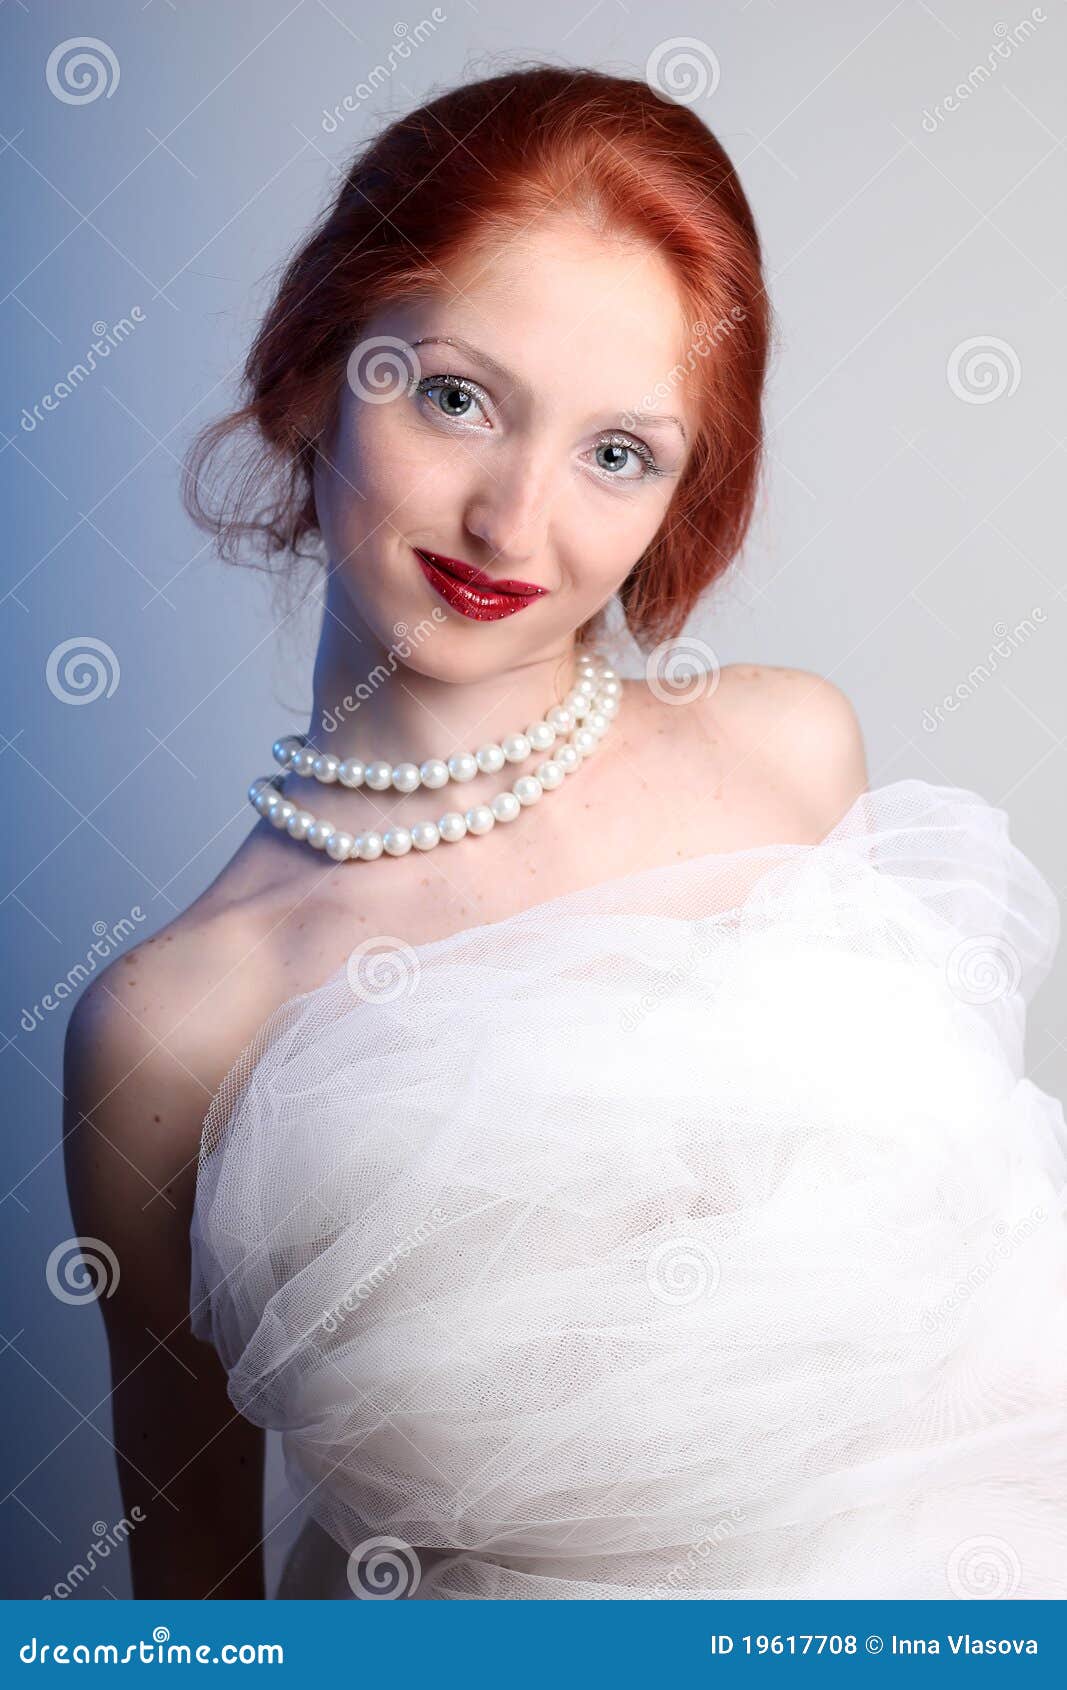 Beautiful Young Woman with Red Hair Bride Stock Photo - Image of face ...